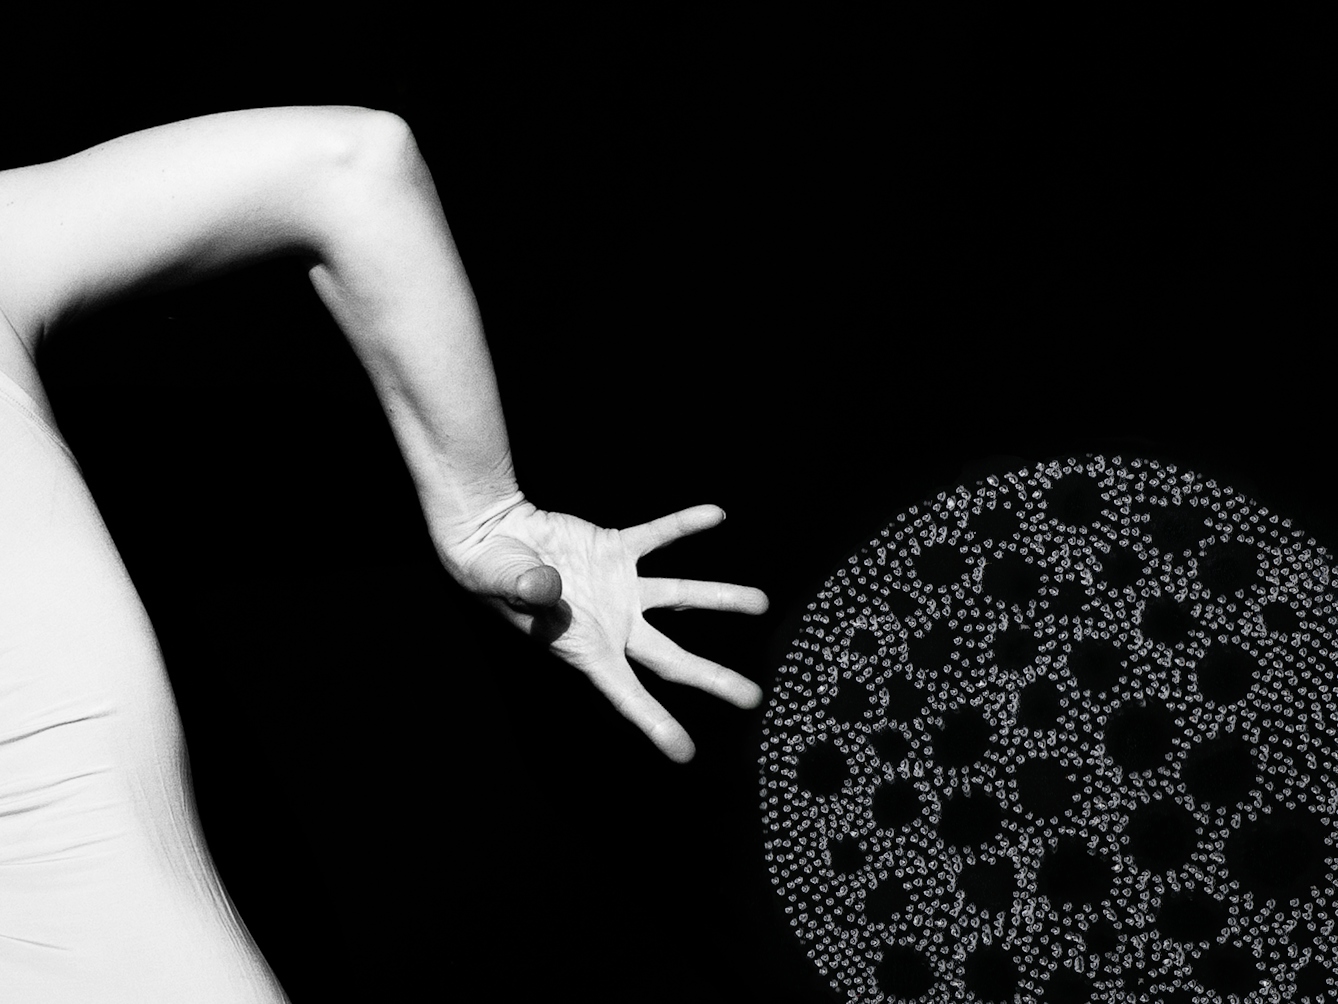 Artwork made up of a black and white photograph of part of a female figure from behind, from the waist up, against a black background. Her body is twisted in a dancerly pose.  Her right arm is bent down to the ground, hand outstretched. To the right and below her right hand is another large circular shape with holes in the middle, made up of a layered texture of grey dots which are painted onto the print creating a three dimensional texture.